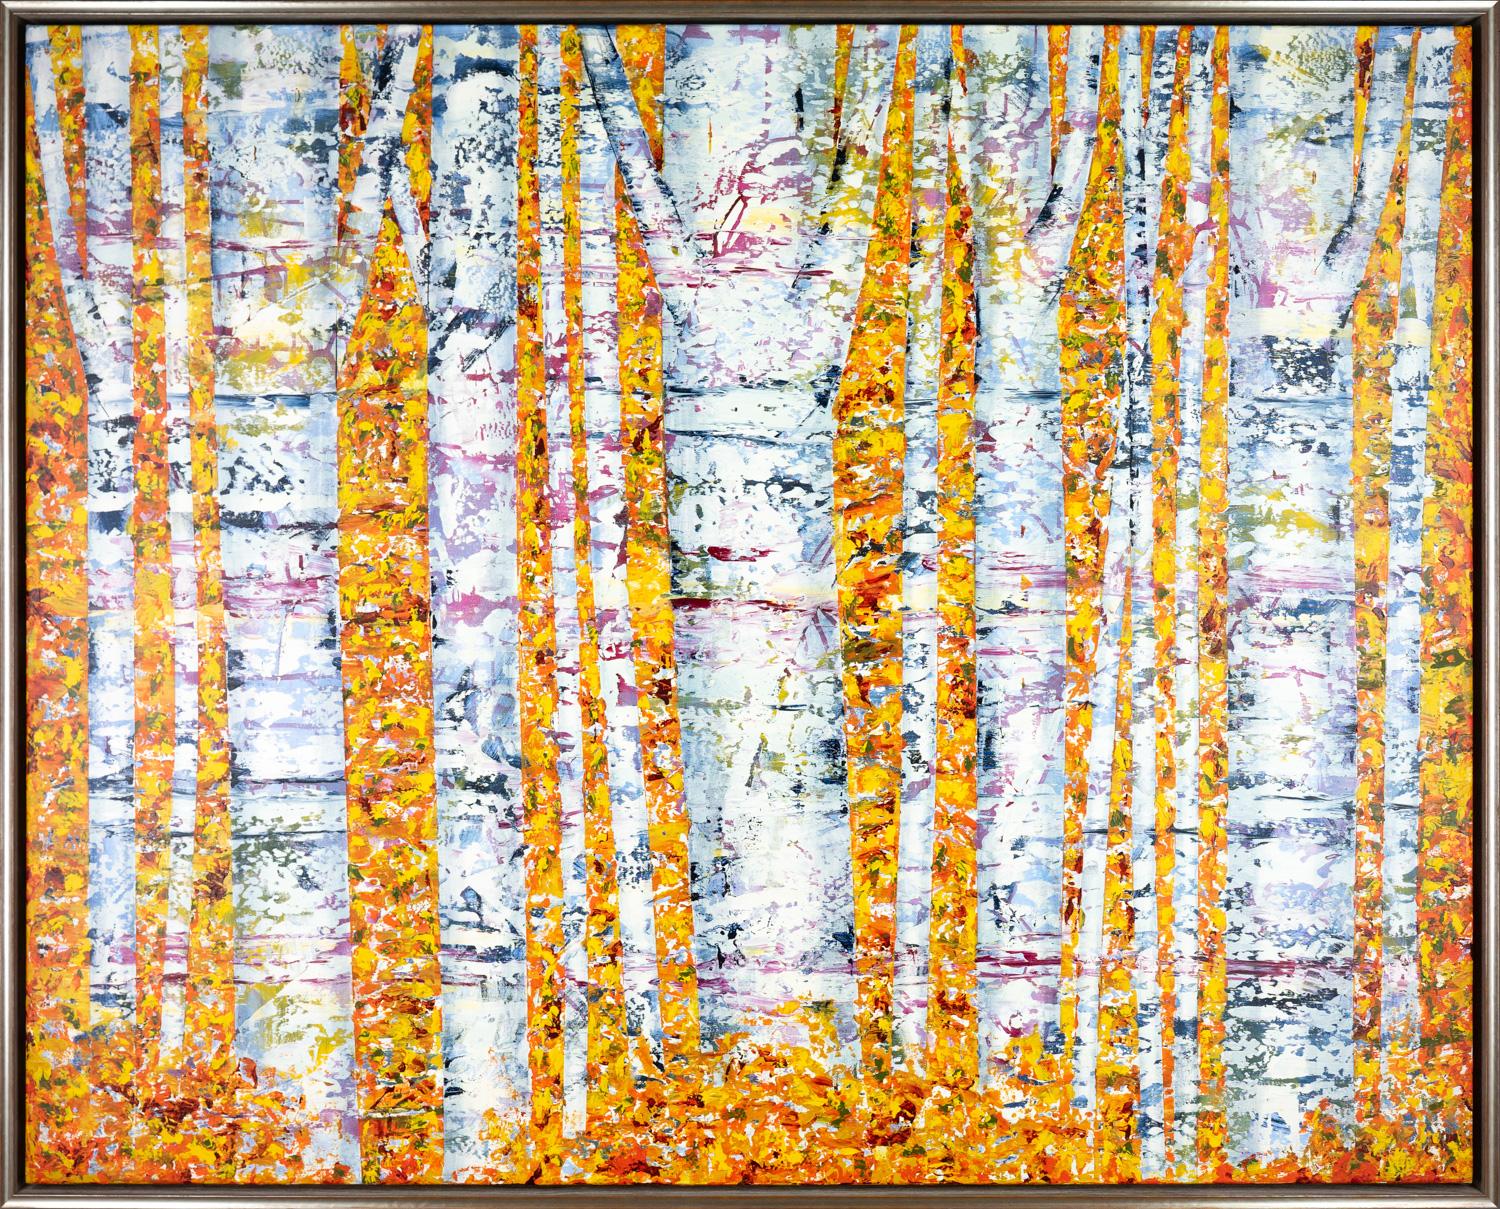 David Skillicorn Abstract Painting - "Nel Bosco 12-4" Abstracted Forest Landscape Mixed Media on Canvas Painting